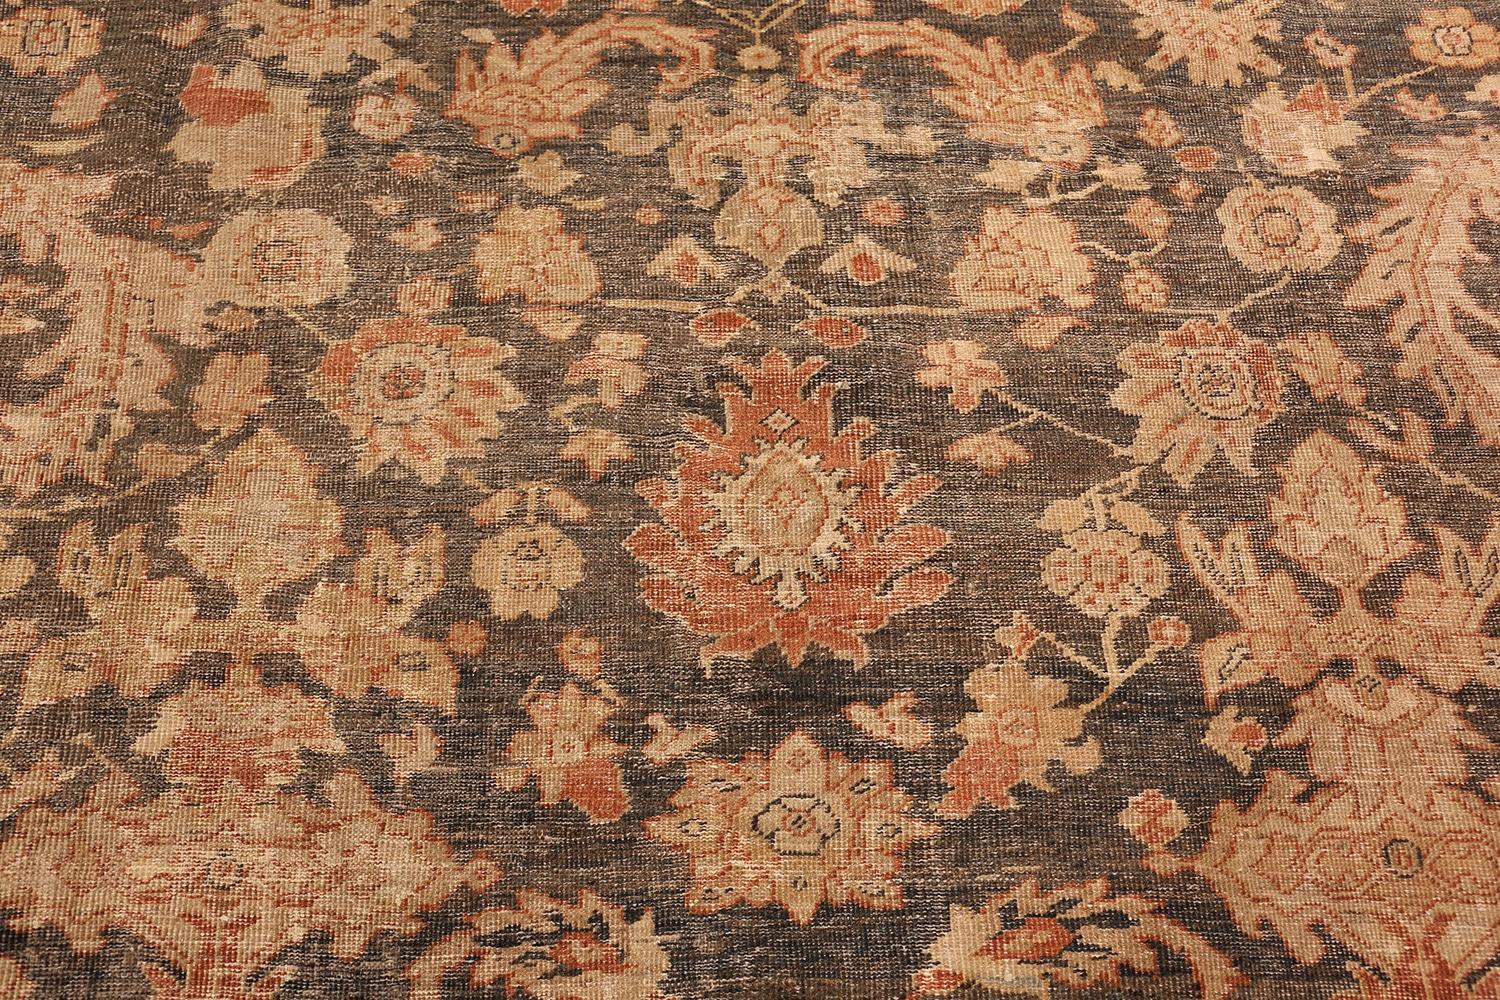 Wool Antique Sultanabad Persian Rug. Size: 10 ft x 17 ft 3 in  For Sale